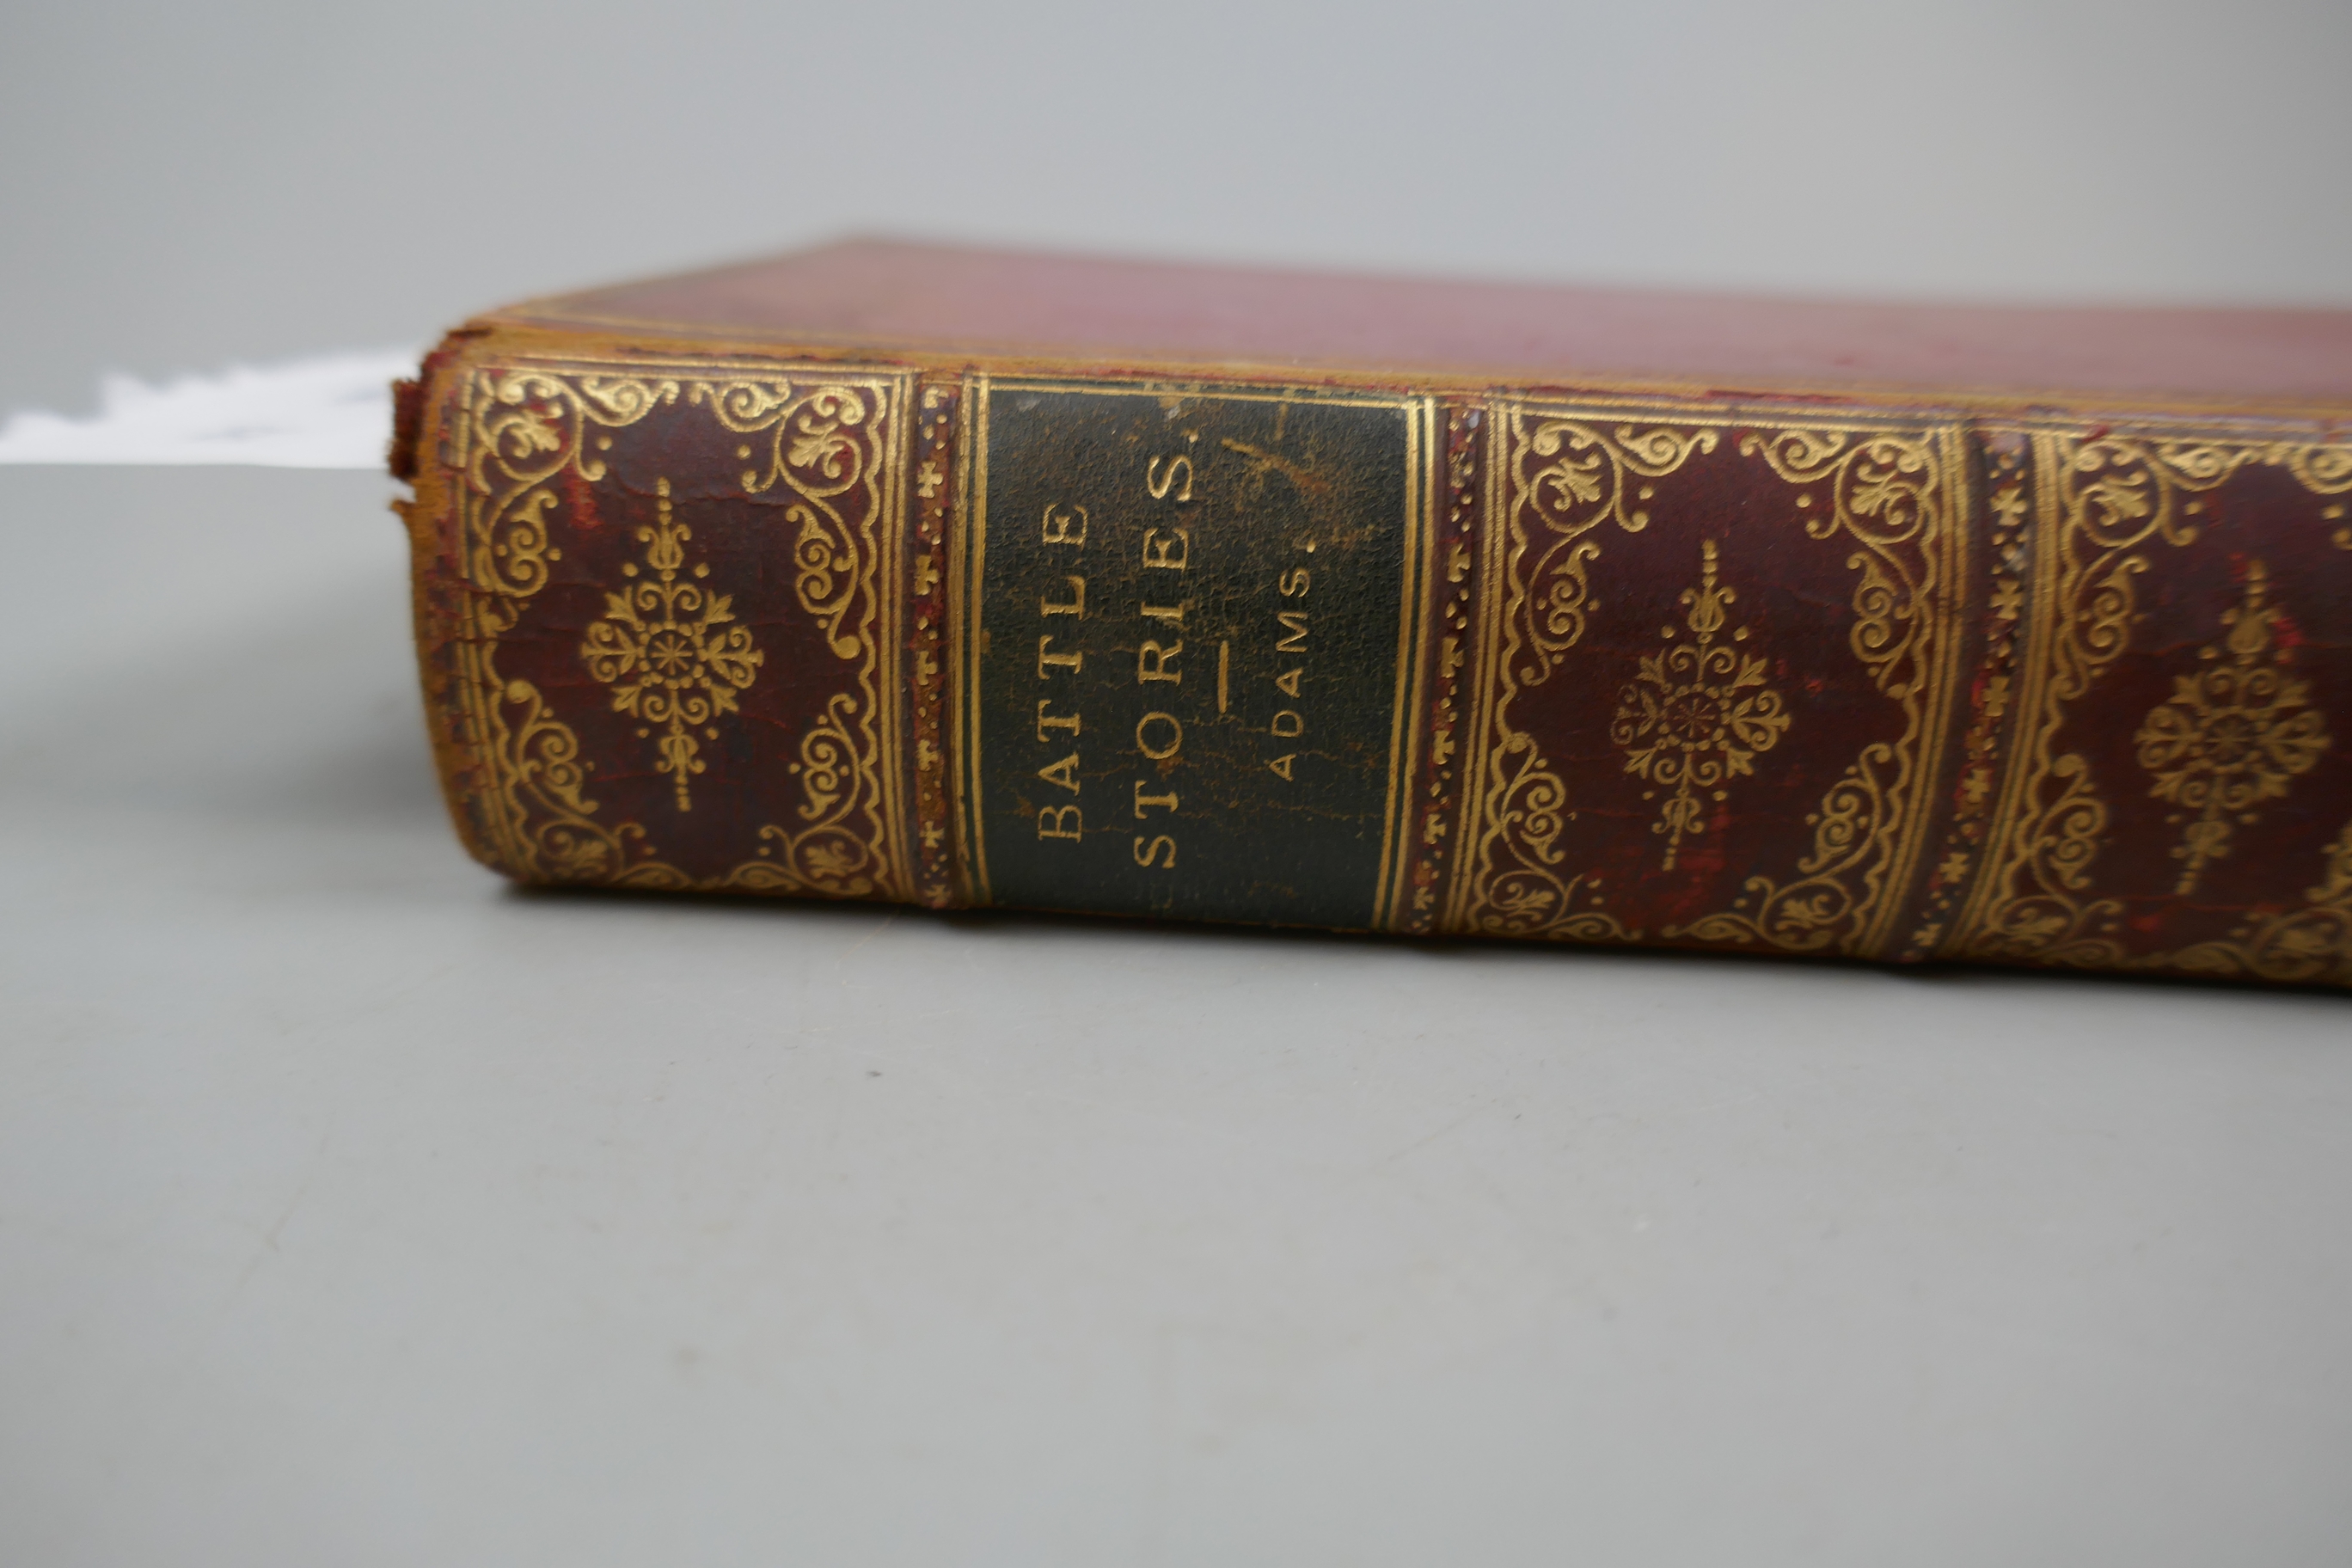 Leather bound book - Battle Stories by W H Davenport Adams - Image 2 of 4